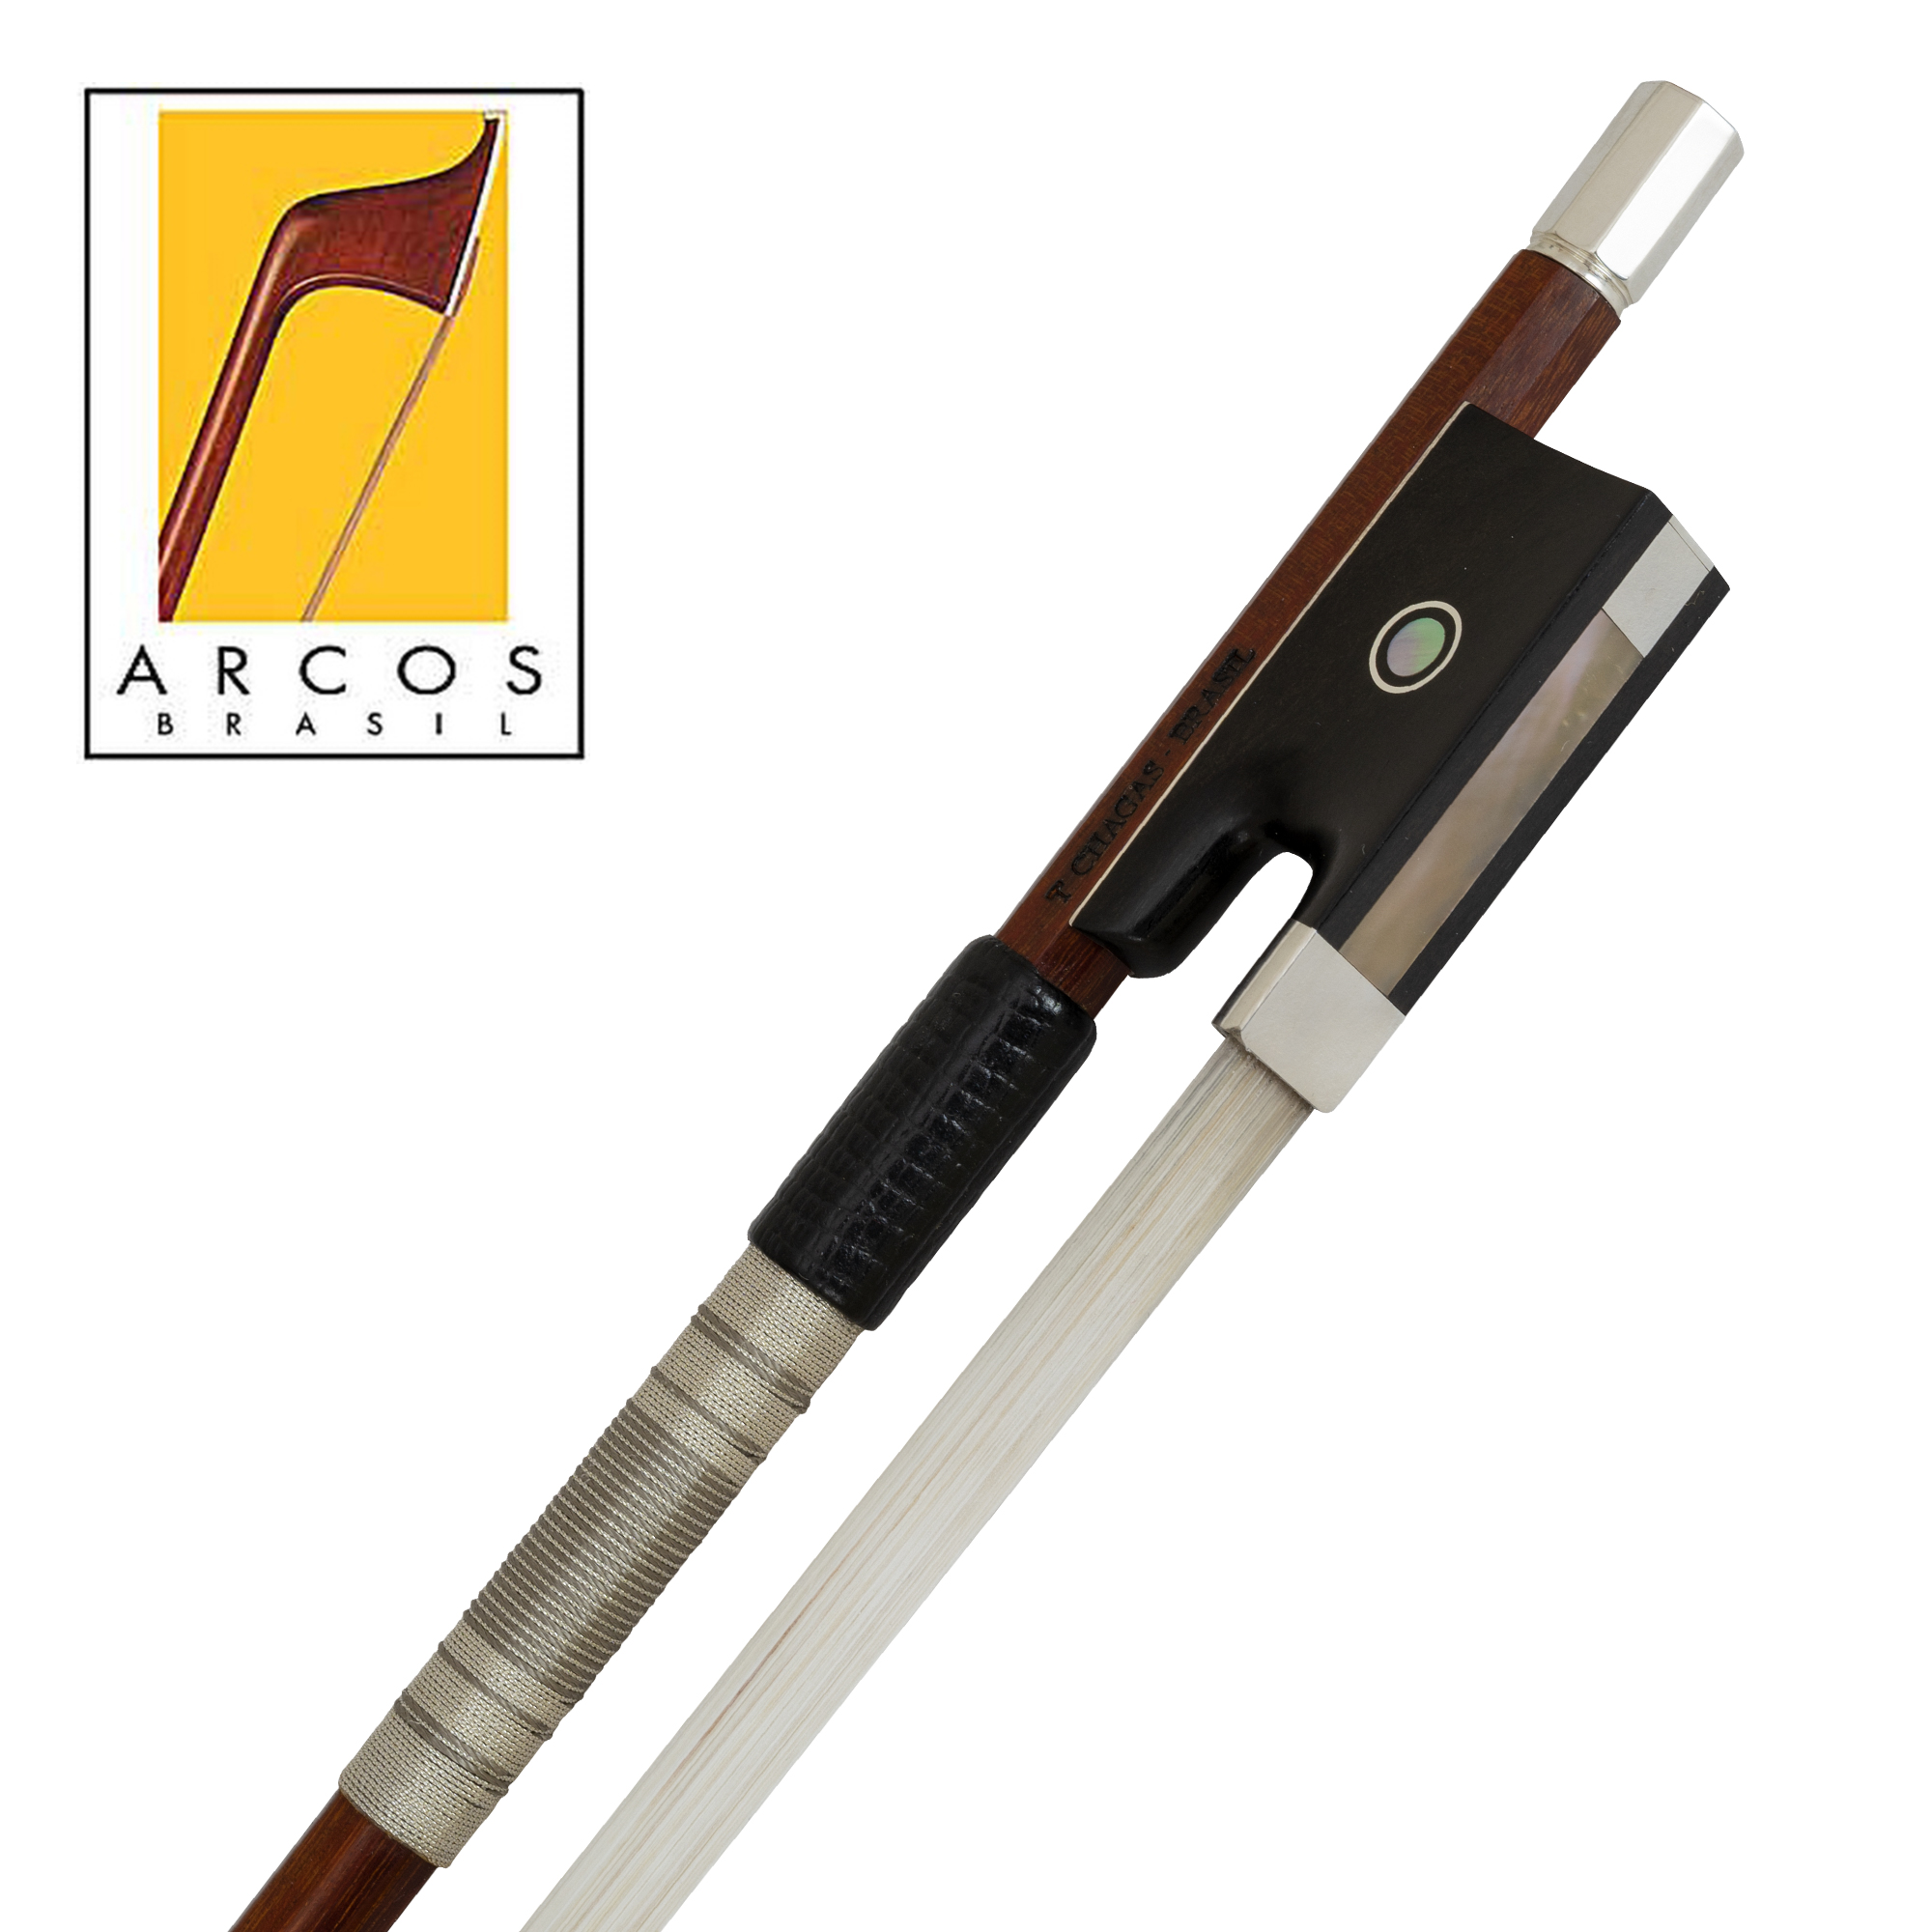 Arcos Brasil Sartory Replica Silver Mounted Violin Bow in action